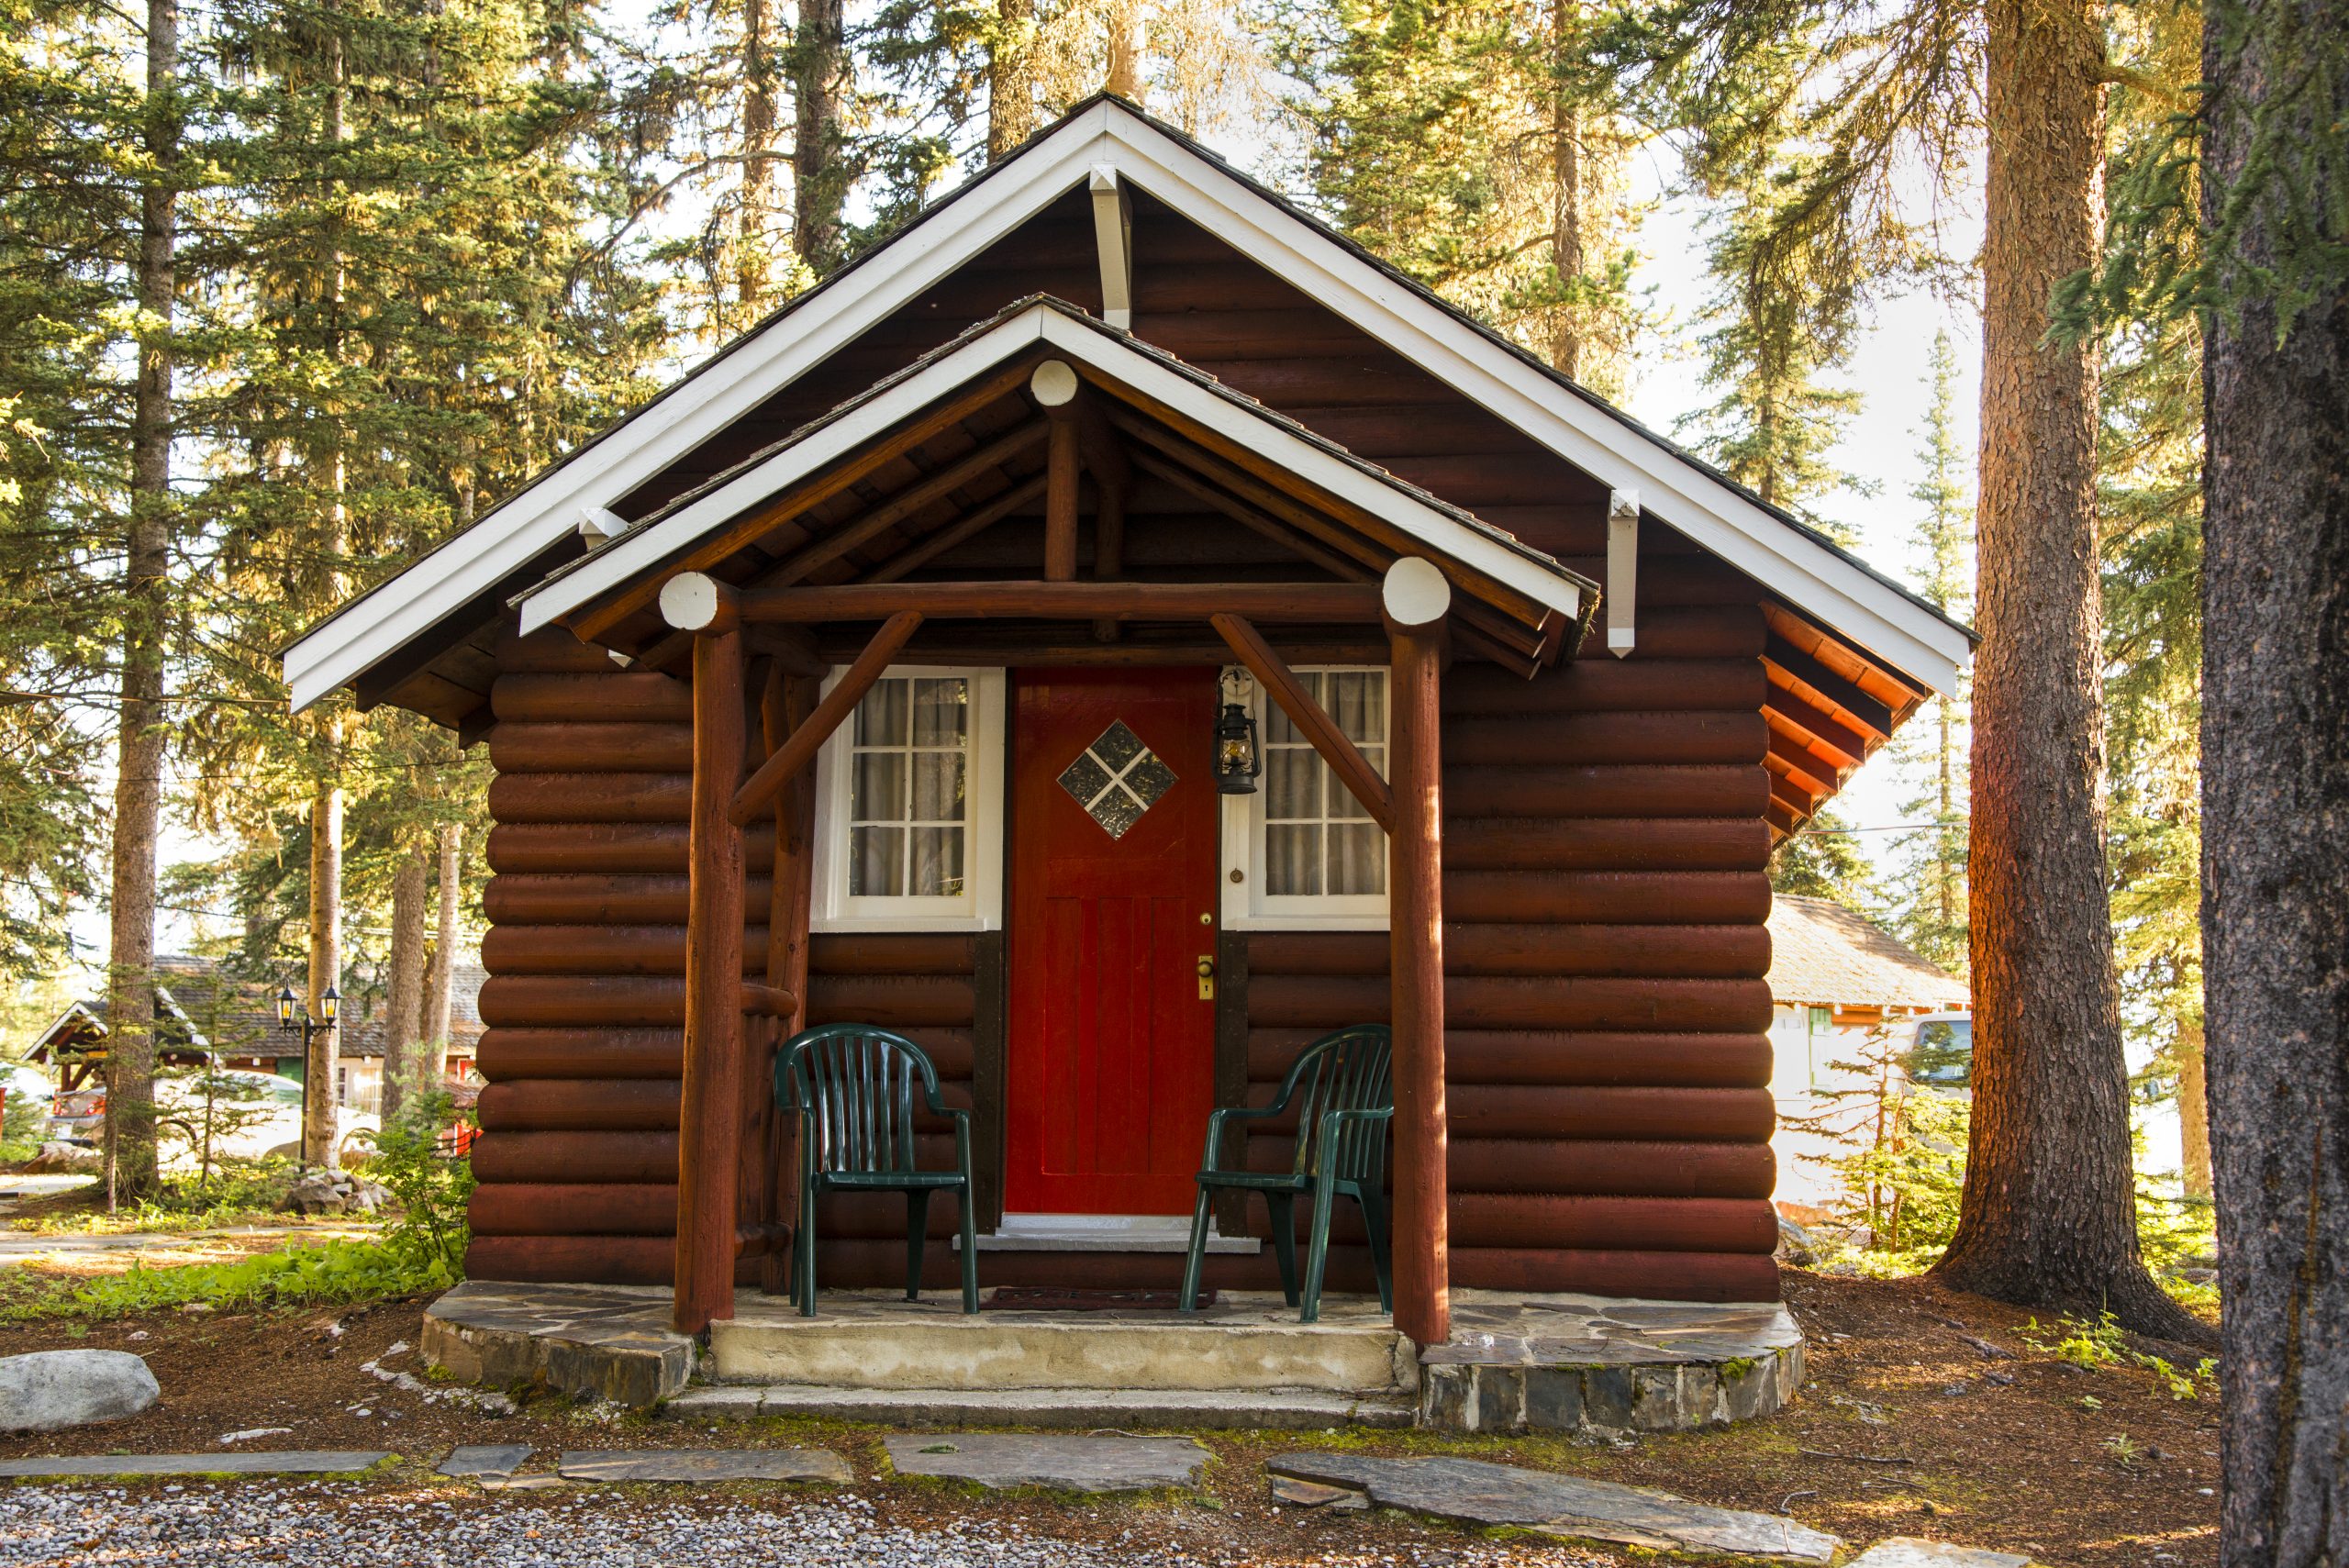 Investment Property cabin in the woods